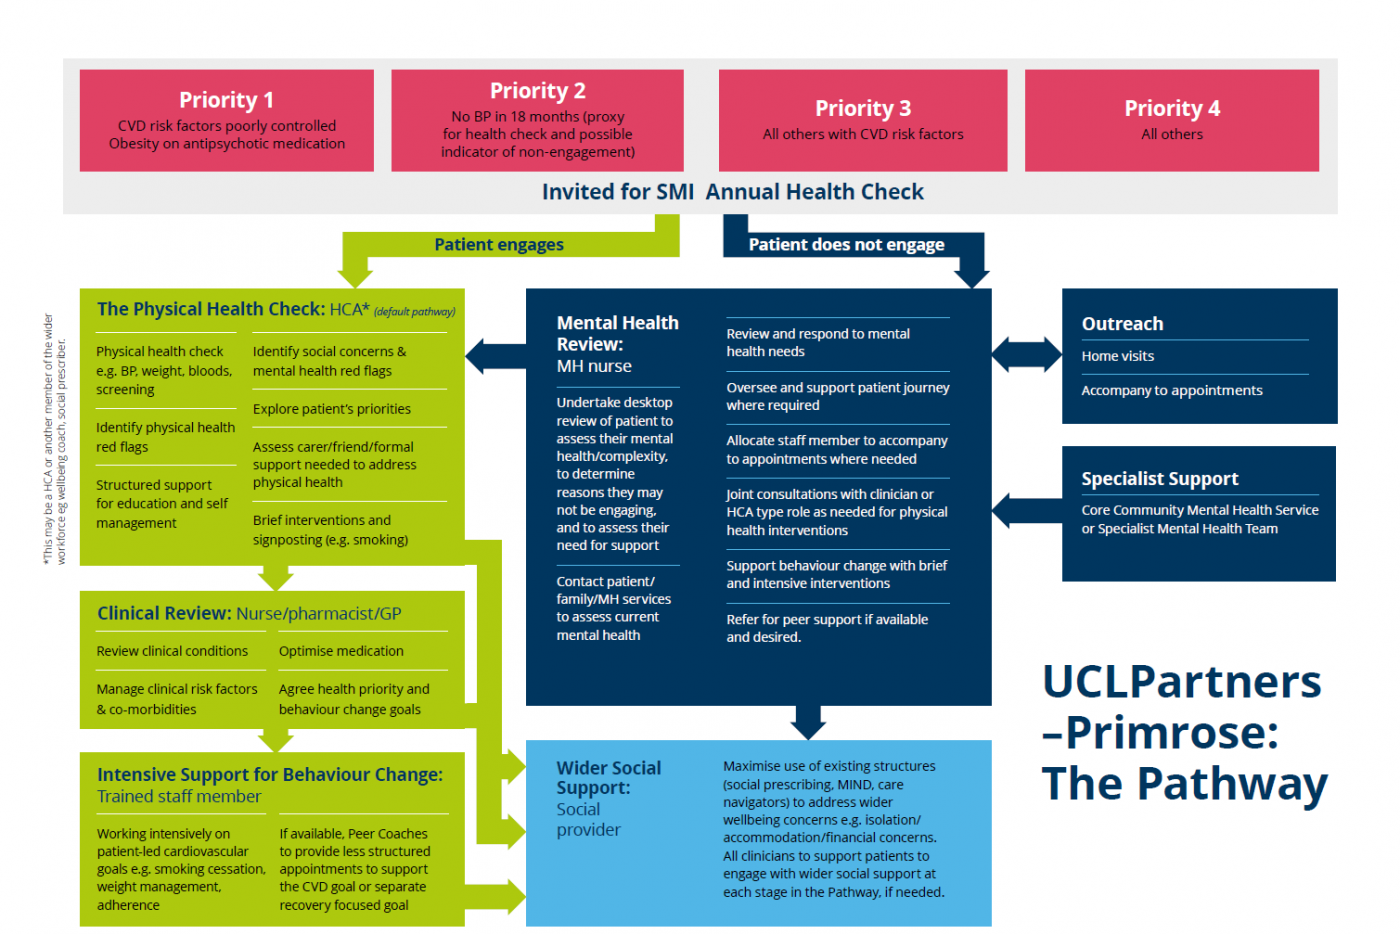 Diagram showing the patient pathways for UCLP-Primrose including patient stratification, routes for patient engagement and non-engagement, outreach, and intensive behaviour change sessions. 